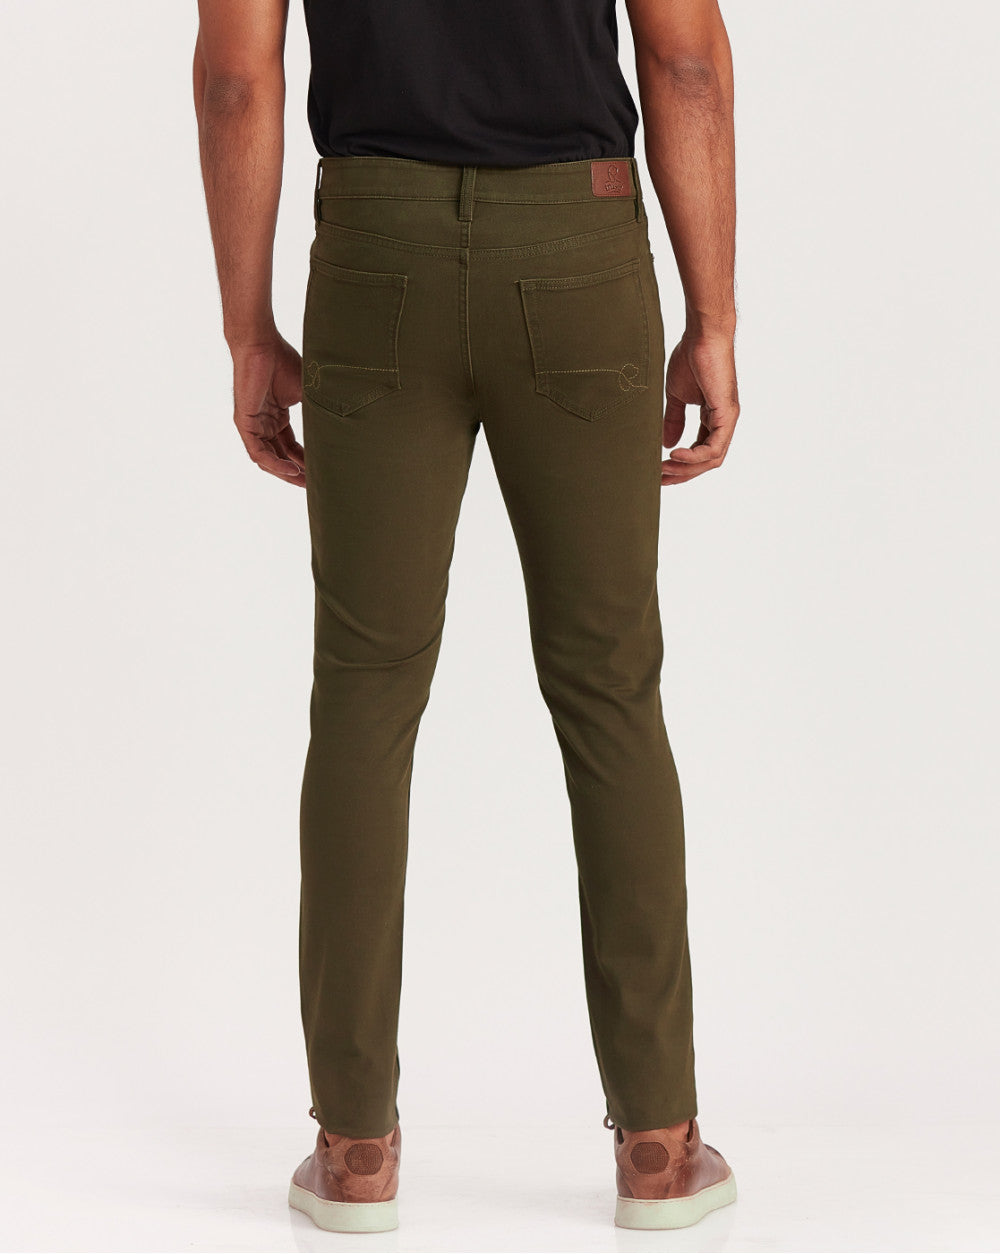 Skinny Fit Five-Pocket Luxe Pants - Camo Green